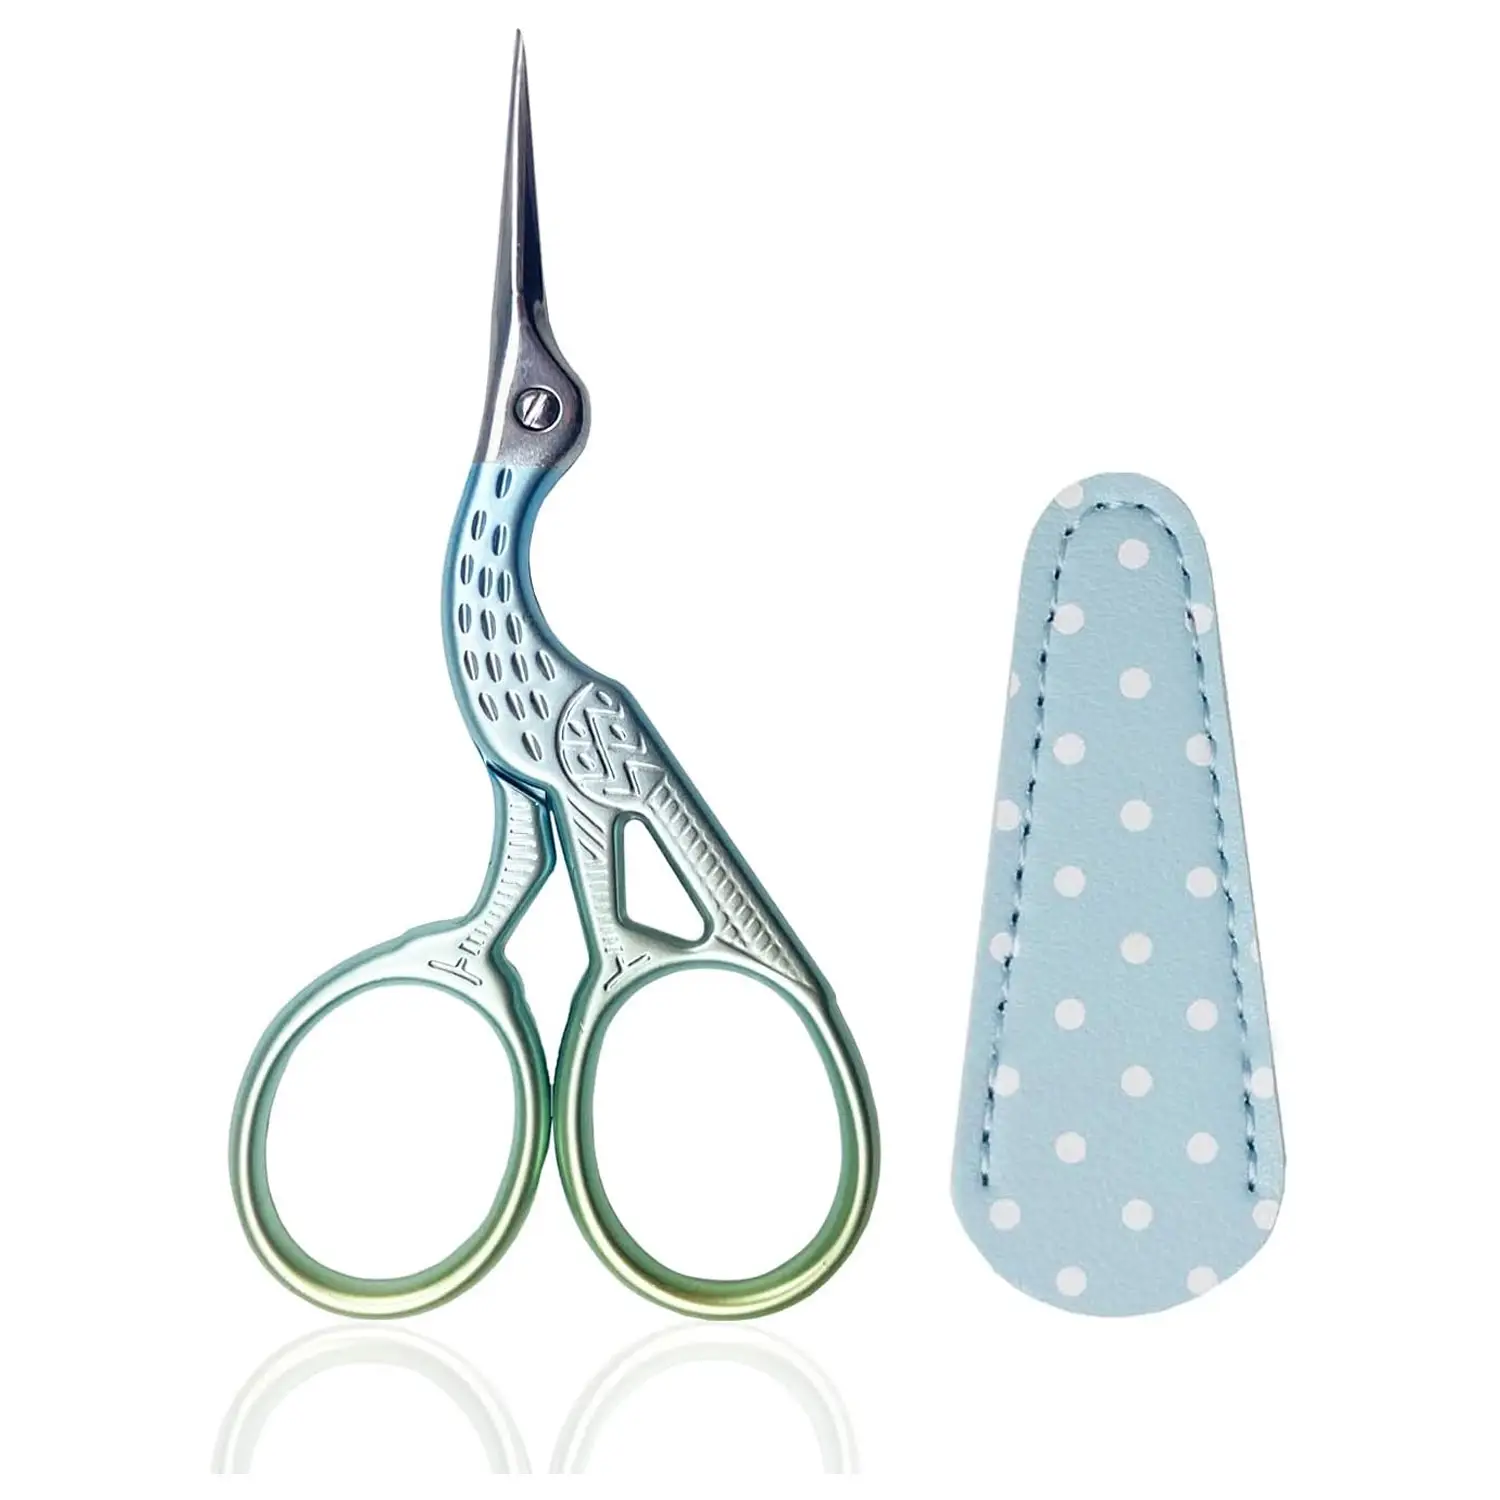 Embroidery Craft Needlework Artwork & Everyday Use 3.6-inch Cyan Scissors Professional Stainless Steel